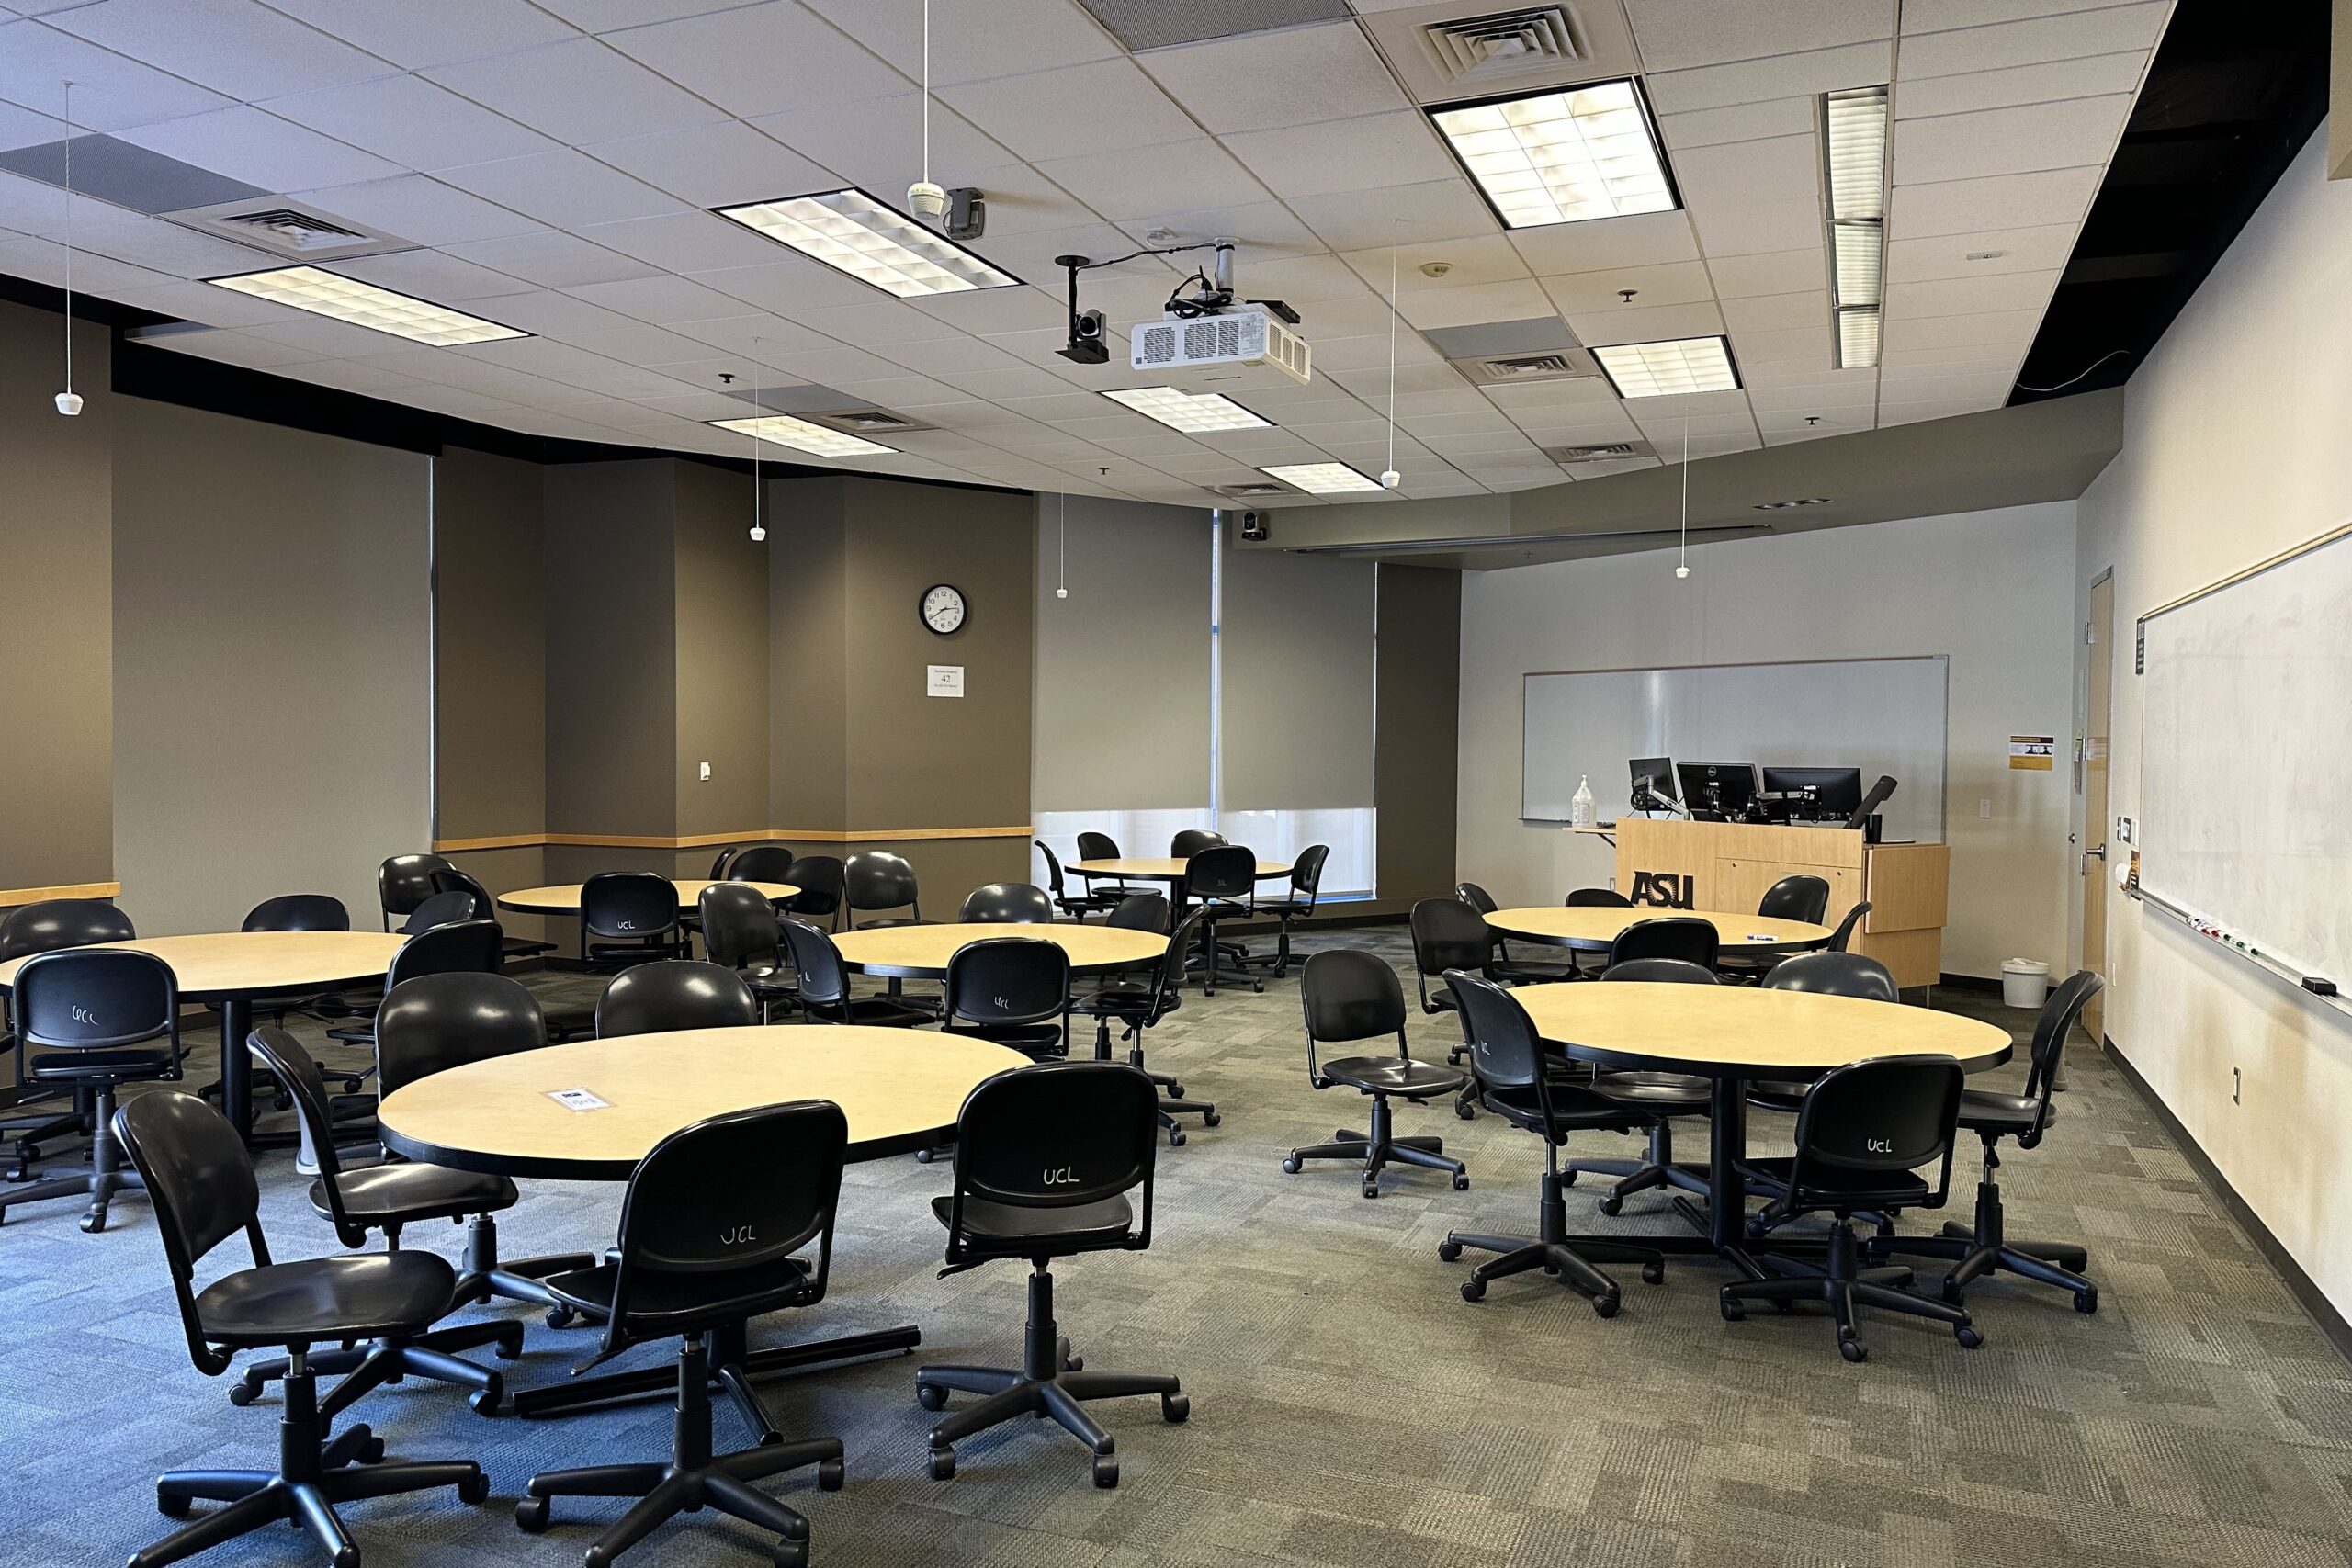 A classroom in the Brickyard building. Multiple round tables with chairs surrounding them. An instructor work station and two white boards, one behind it and one to the side.